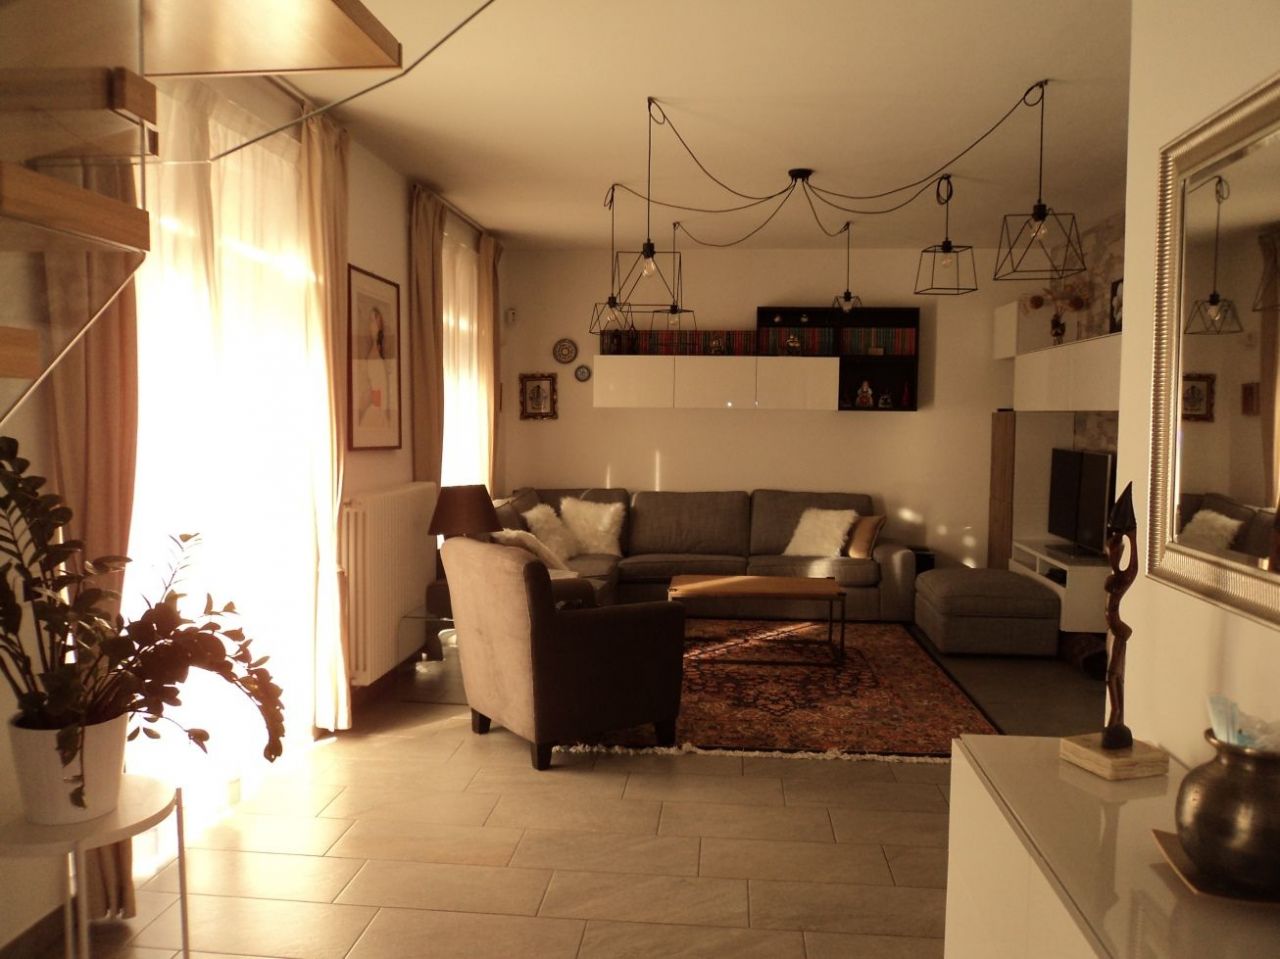 Flat in Porlezza, Italy, 200 sq.m - picture 1